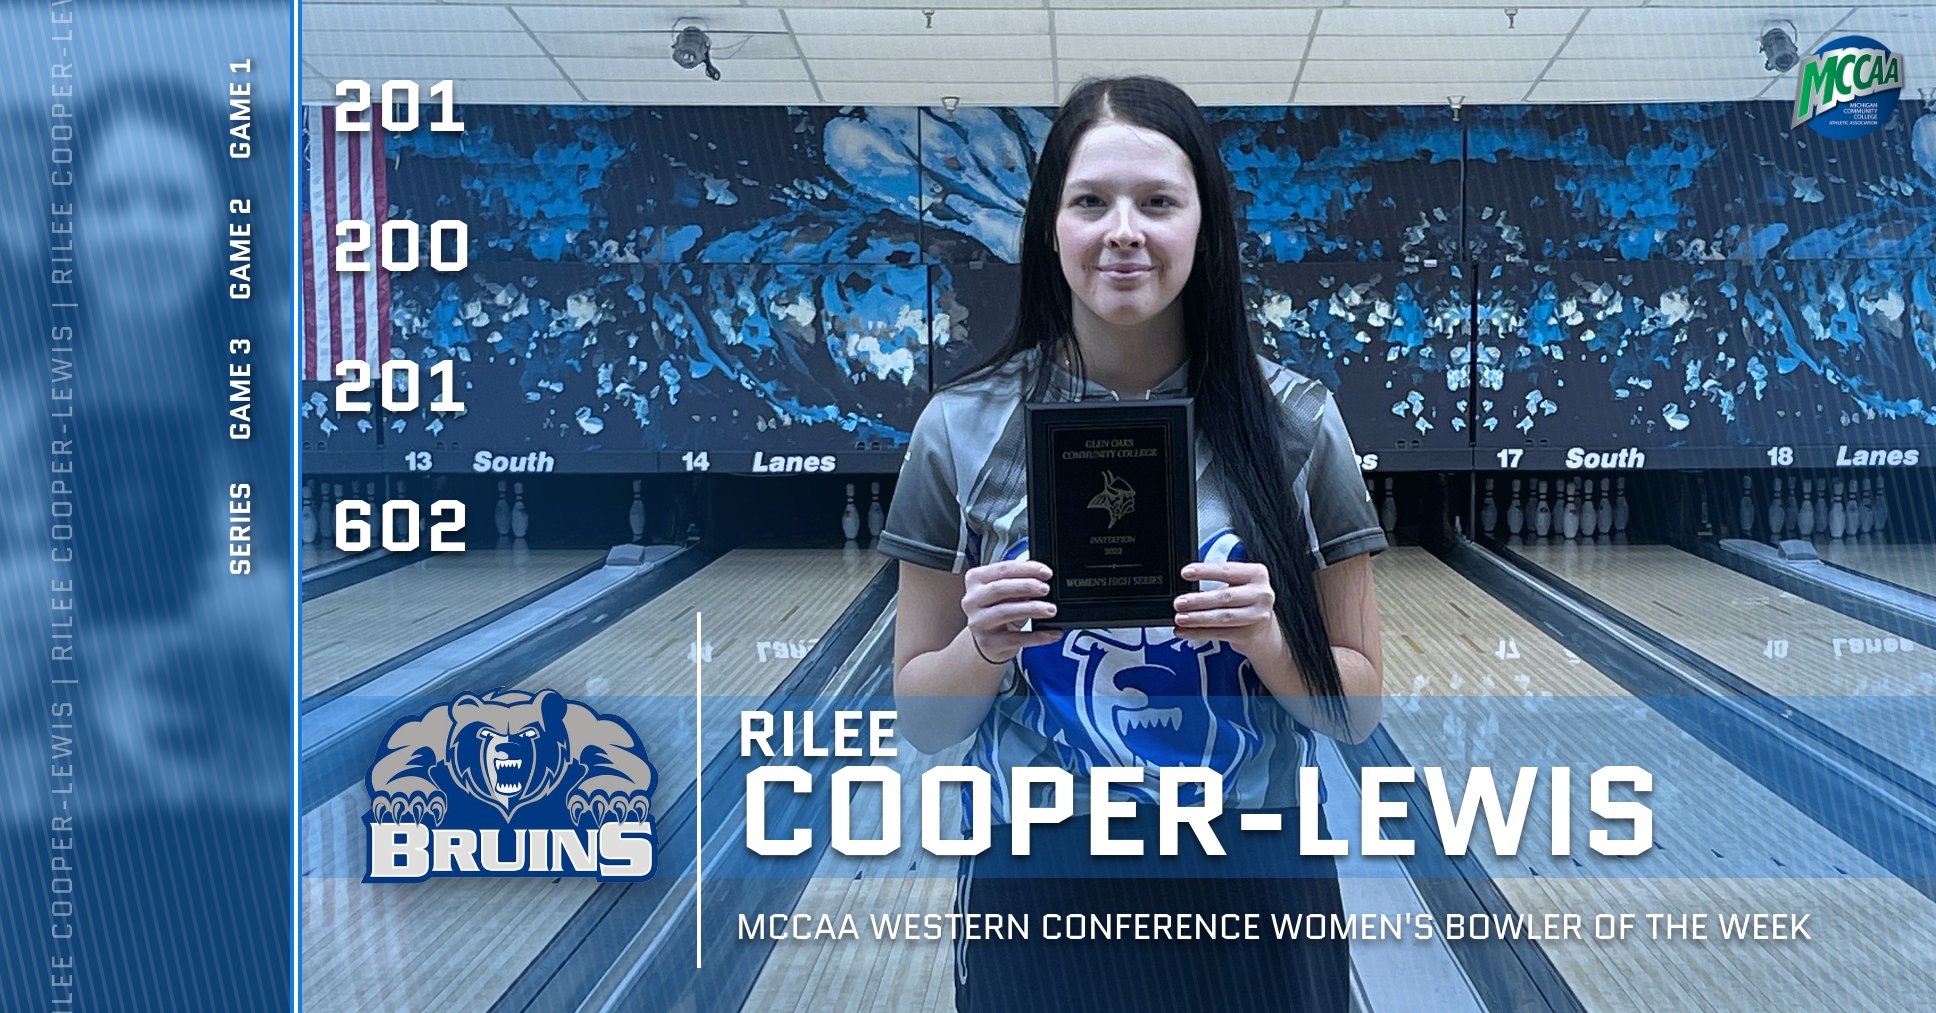 Rilee Cooper-Lewis, MCCAA Western Conference Women's Bowler of the Week, Kellogg Community College.